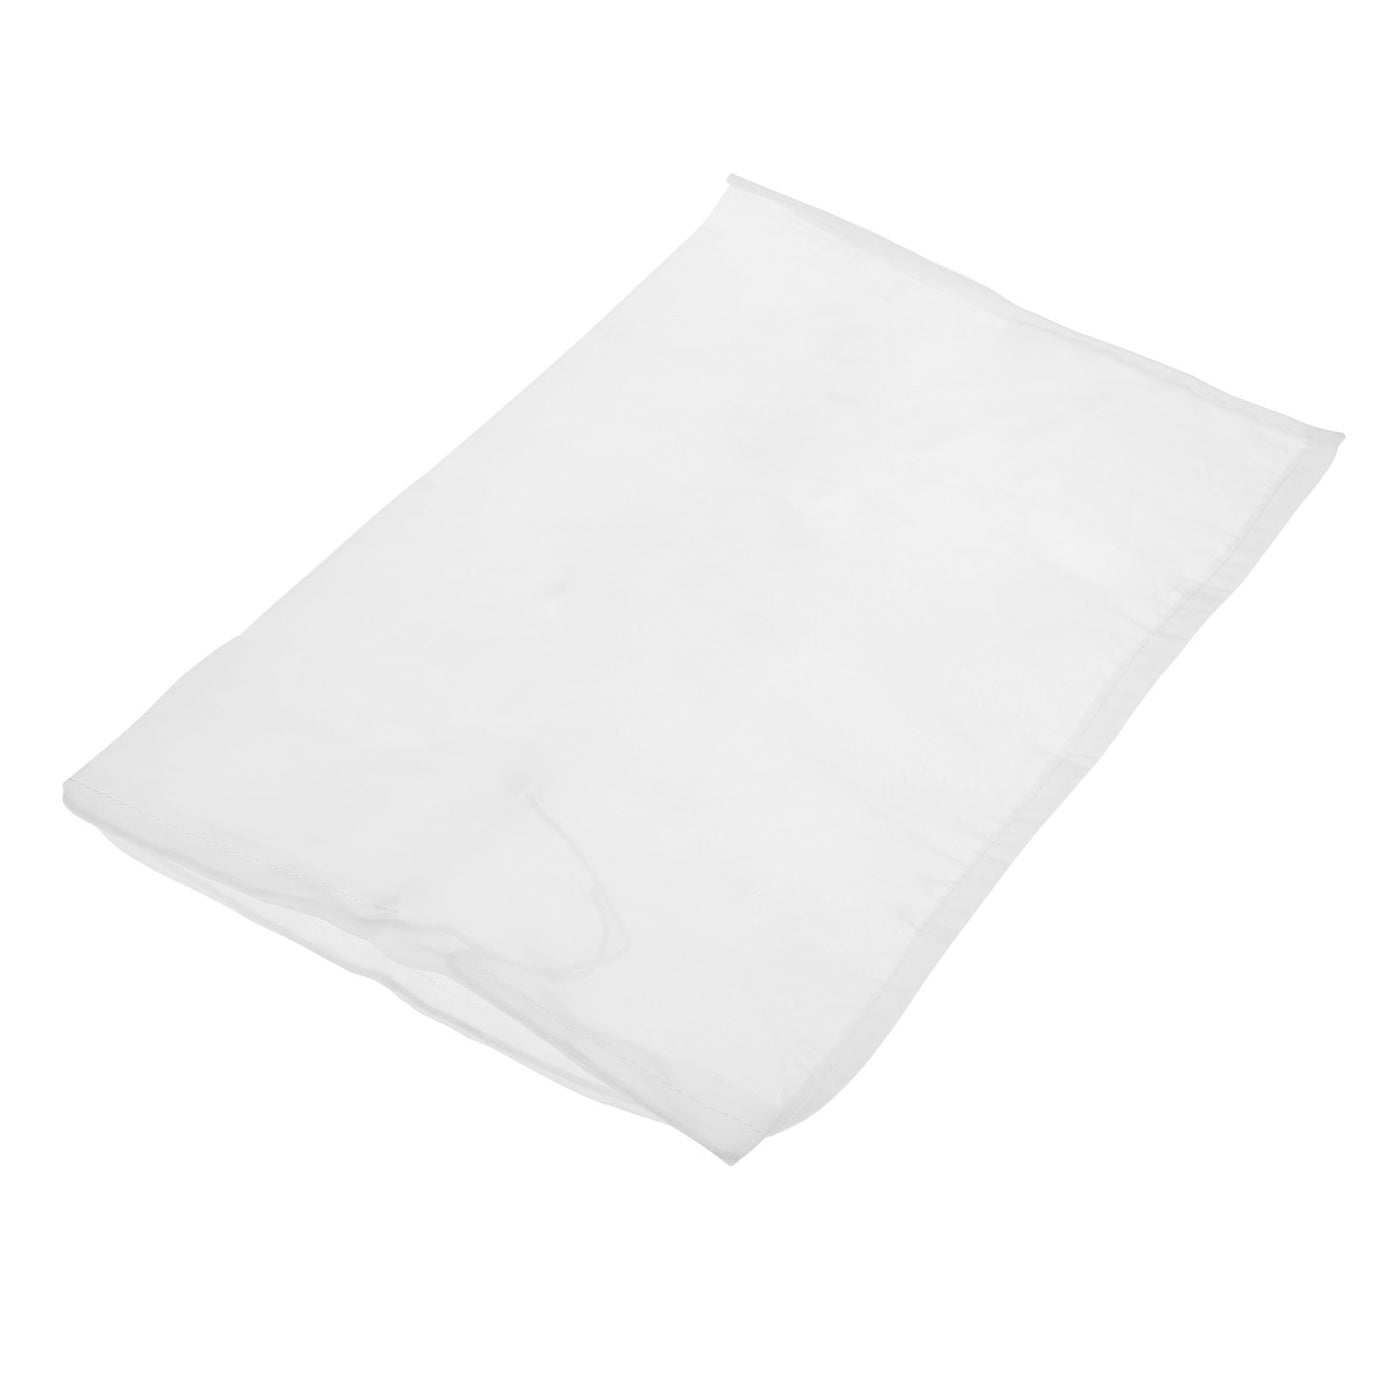 uxcell Uxcell Paint Filter Bag 100 Mesh (17.7"x11.8") Nylon Strainer for Filtering Paint